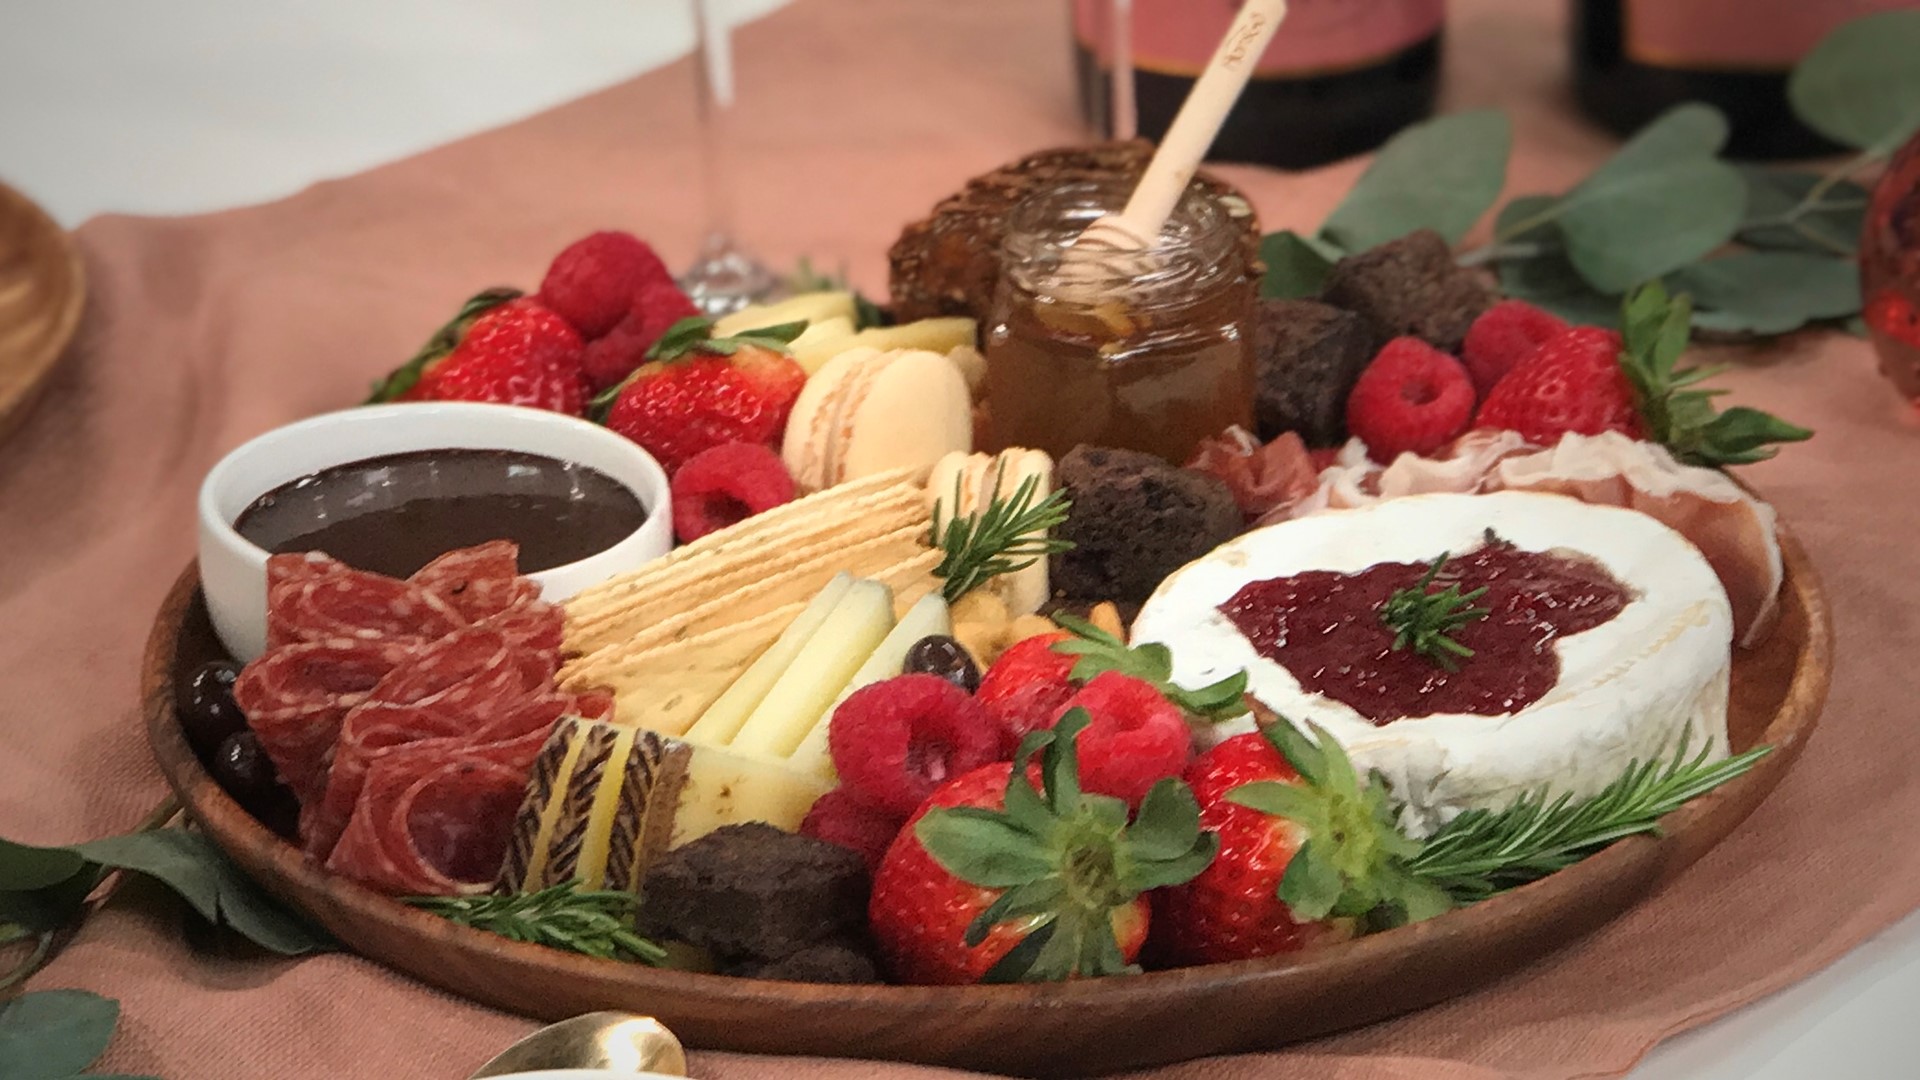 Cheese and meat boards are perfect to share with someone you care about on Valentine's Day. Dished by Rachel helps us put together the perfect grazing board for 2.